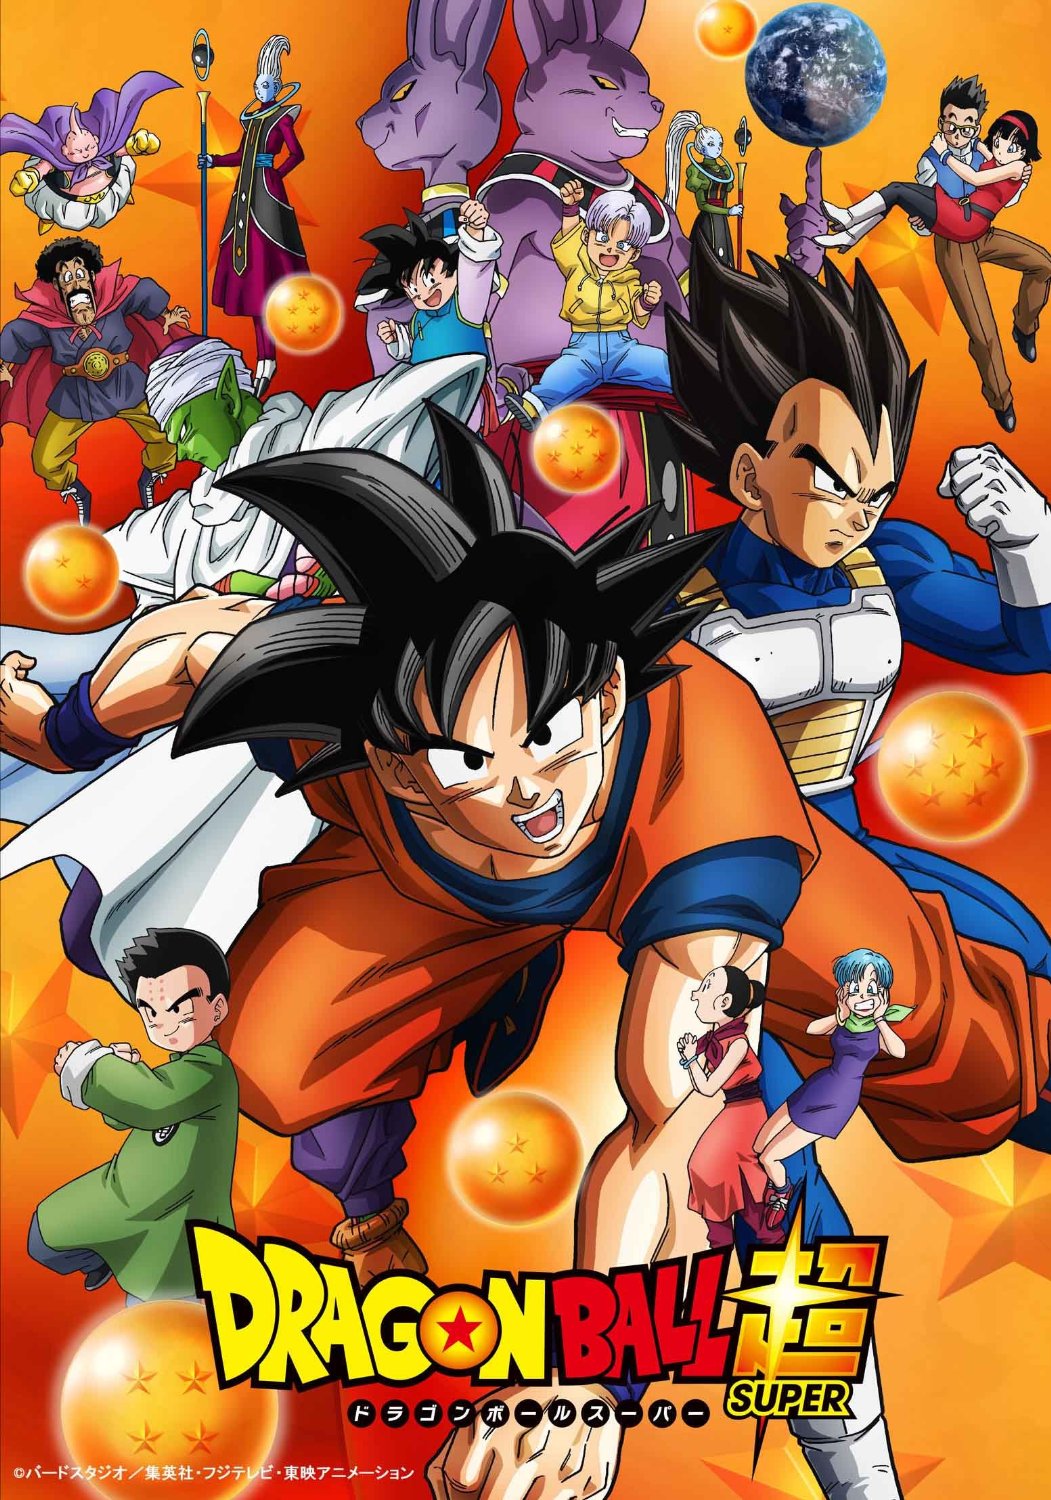 DRAGON BALL: THE BREAKERS Season 3 Launch Date Confirmed! Don't